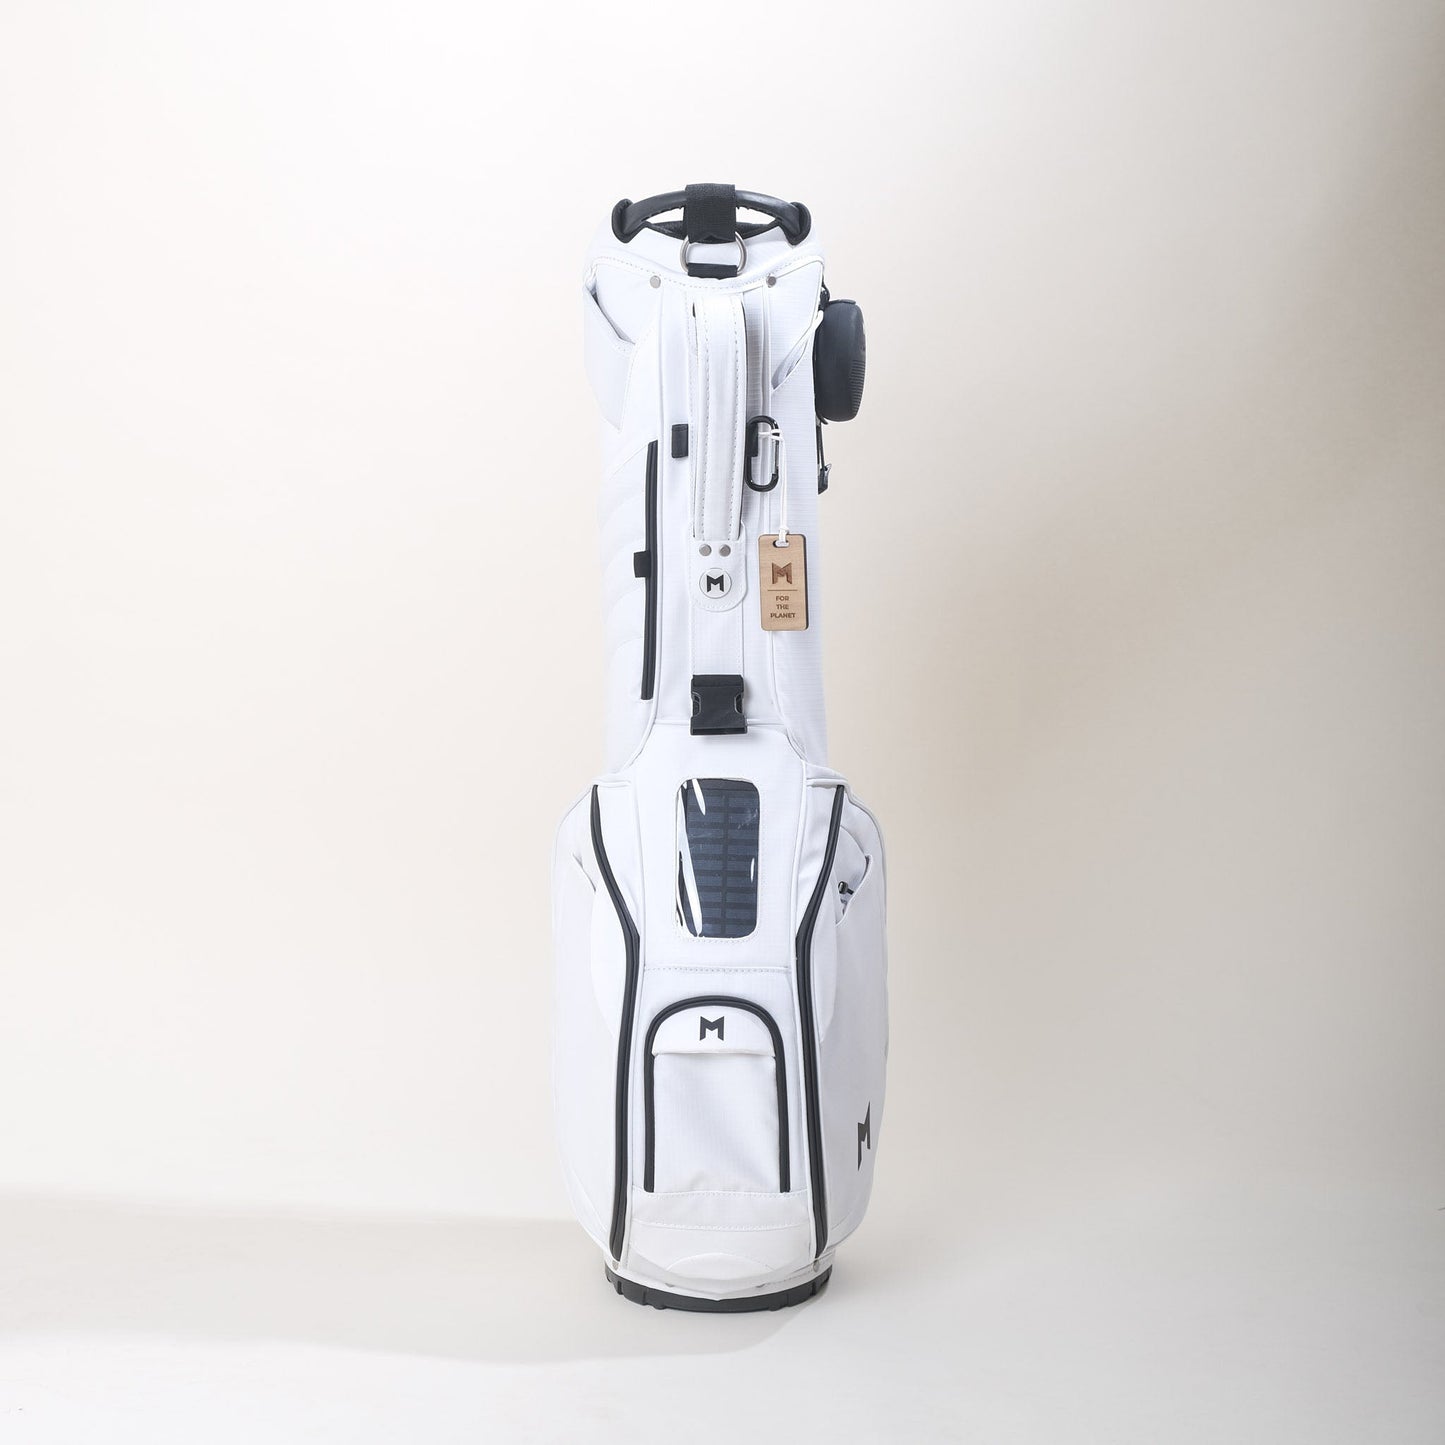 This is the white MNML GOLF MR1 eco friendly golf bag, made from 40 plastic water bottles. 